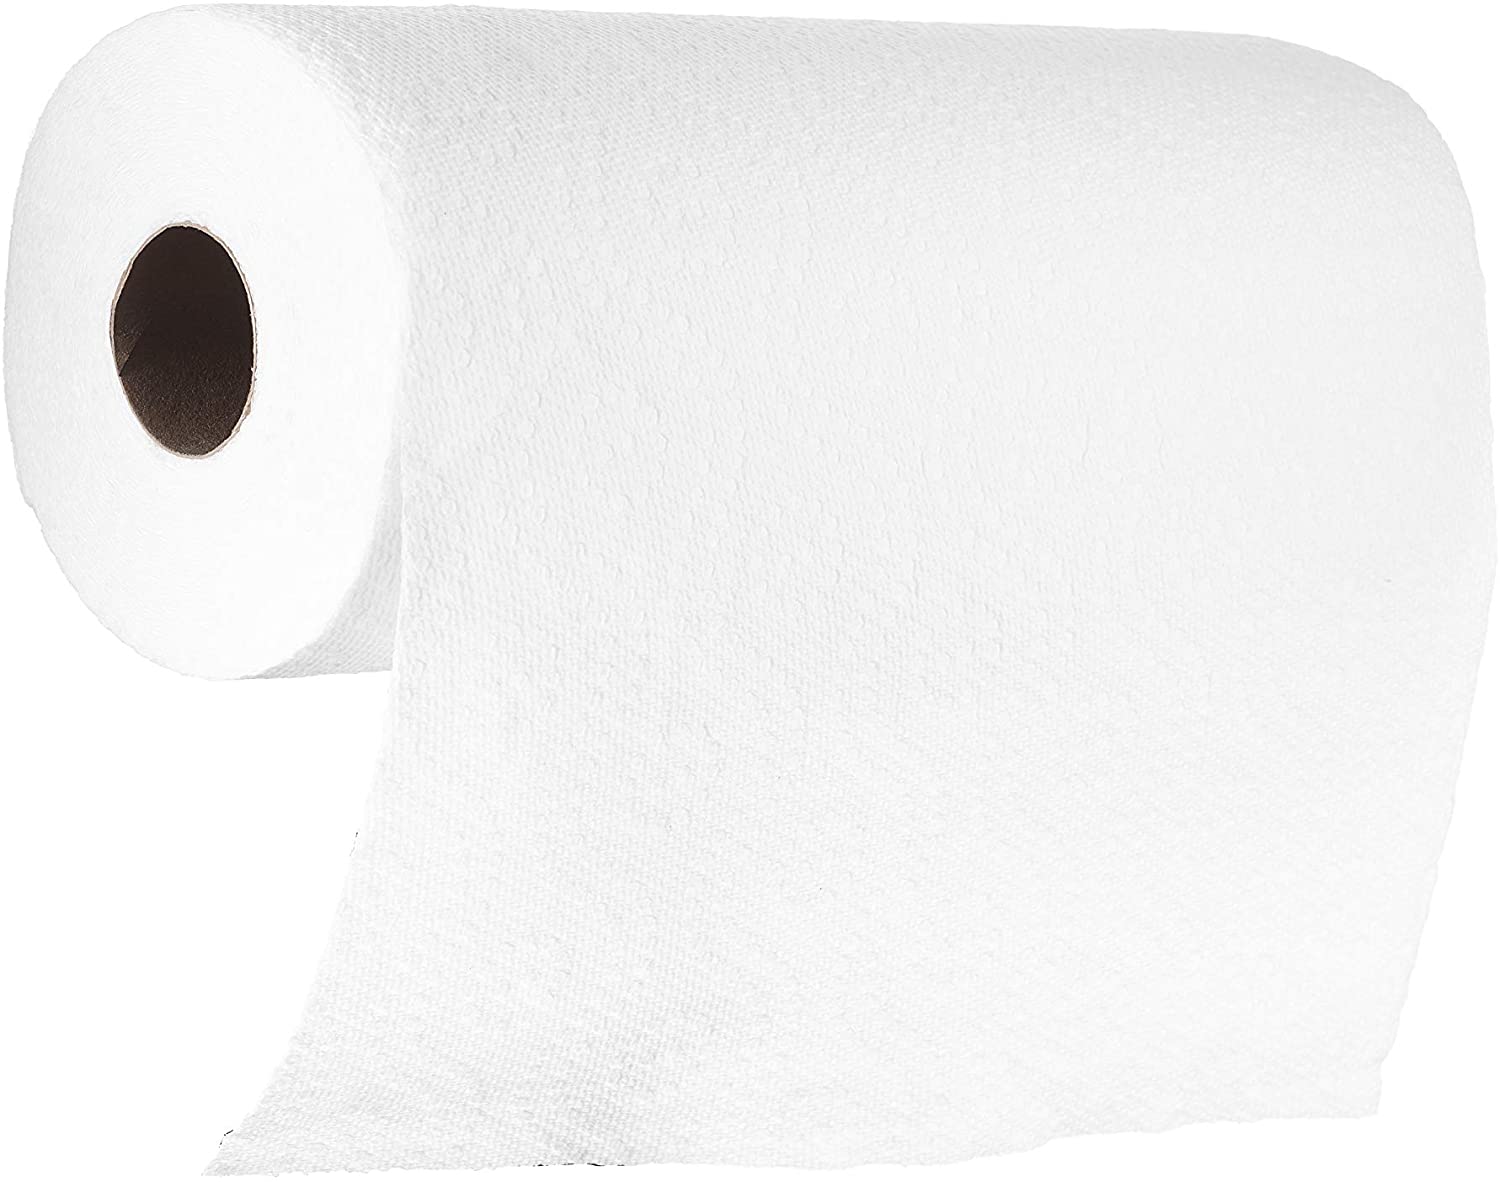 2 PLY Paper Towel Roll White Strong and Absorbent by EcoQuality